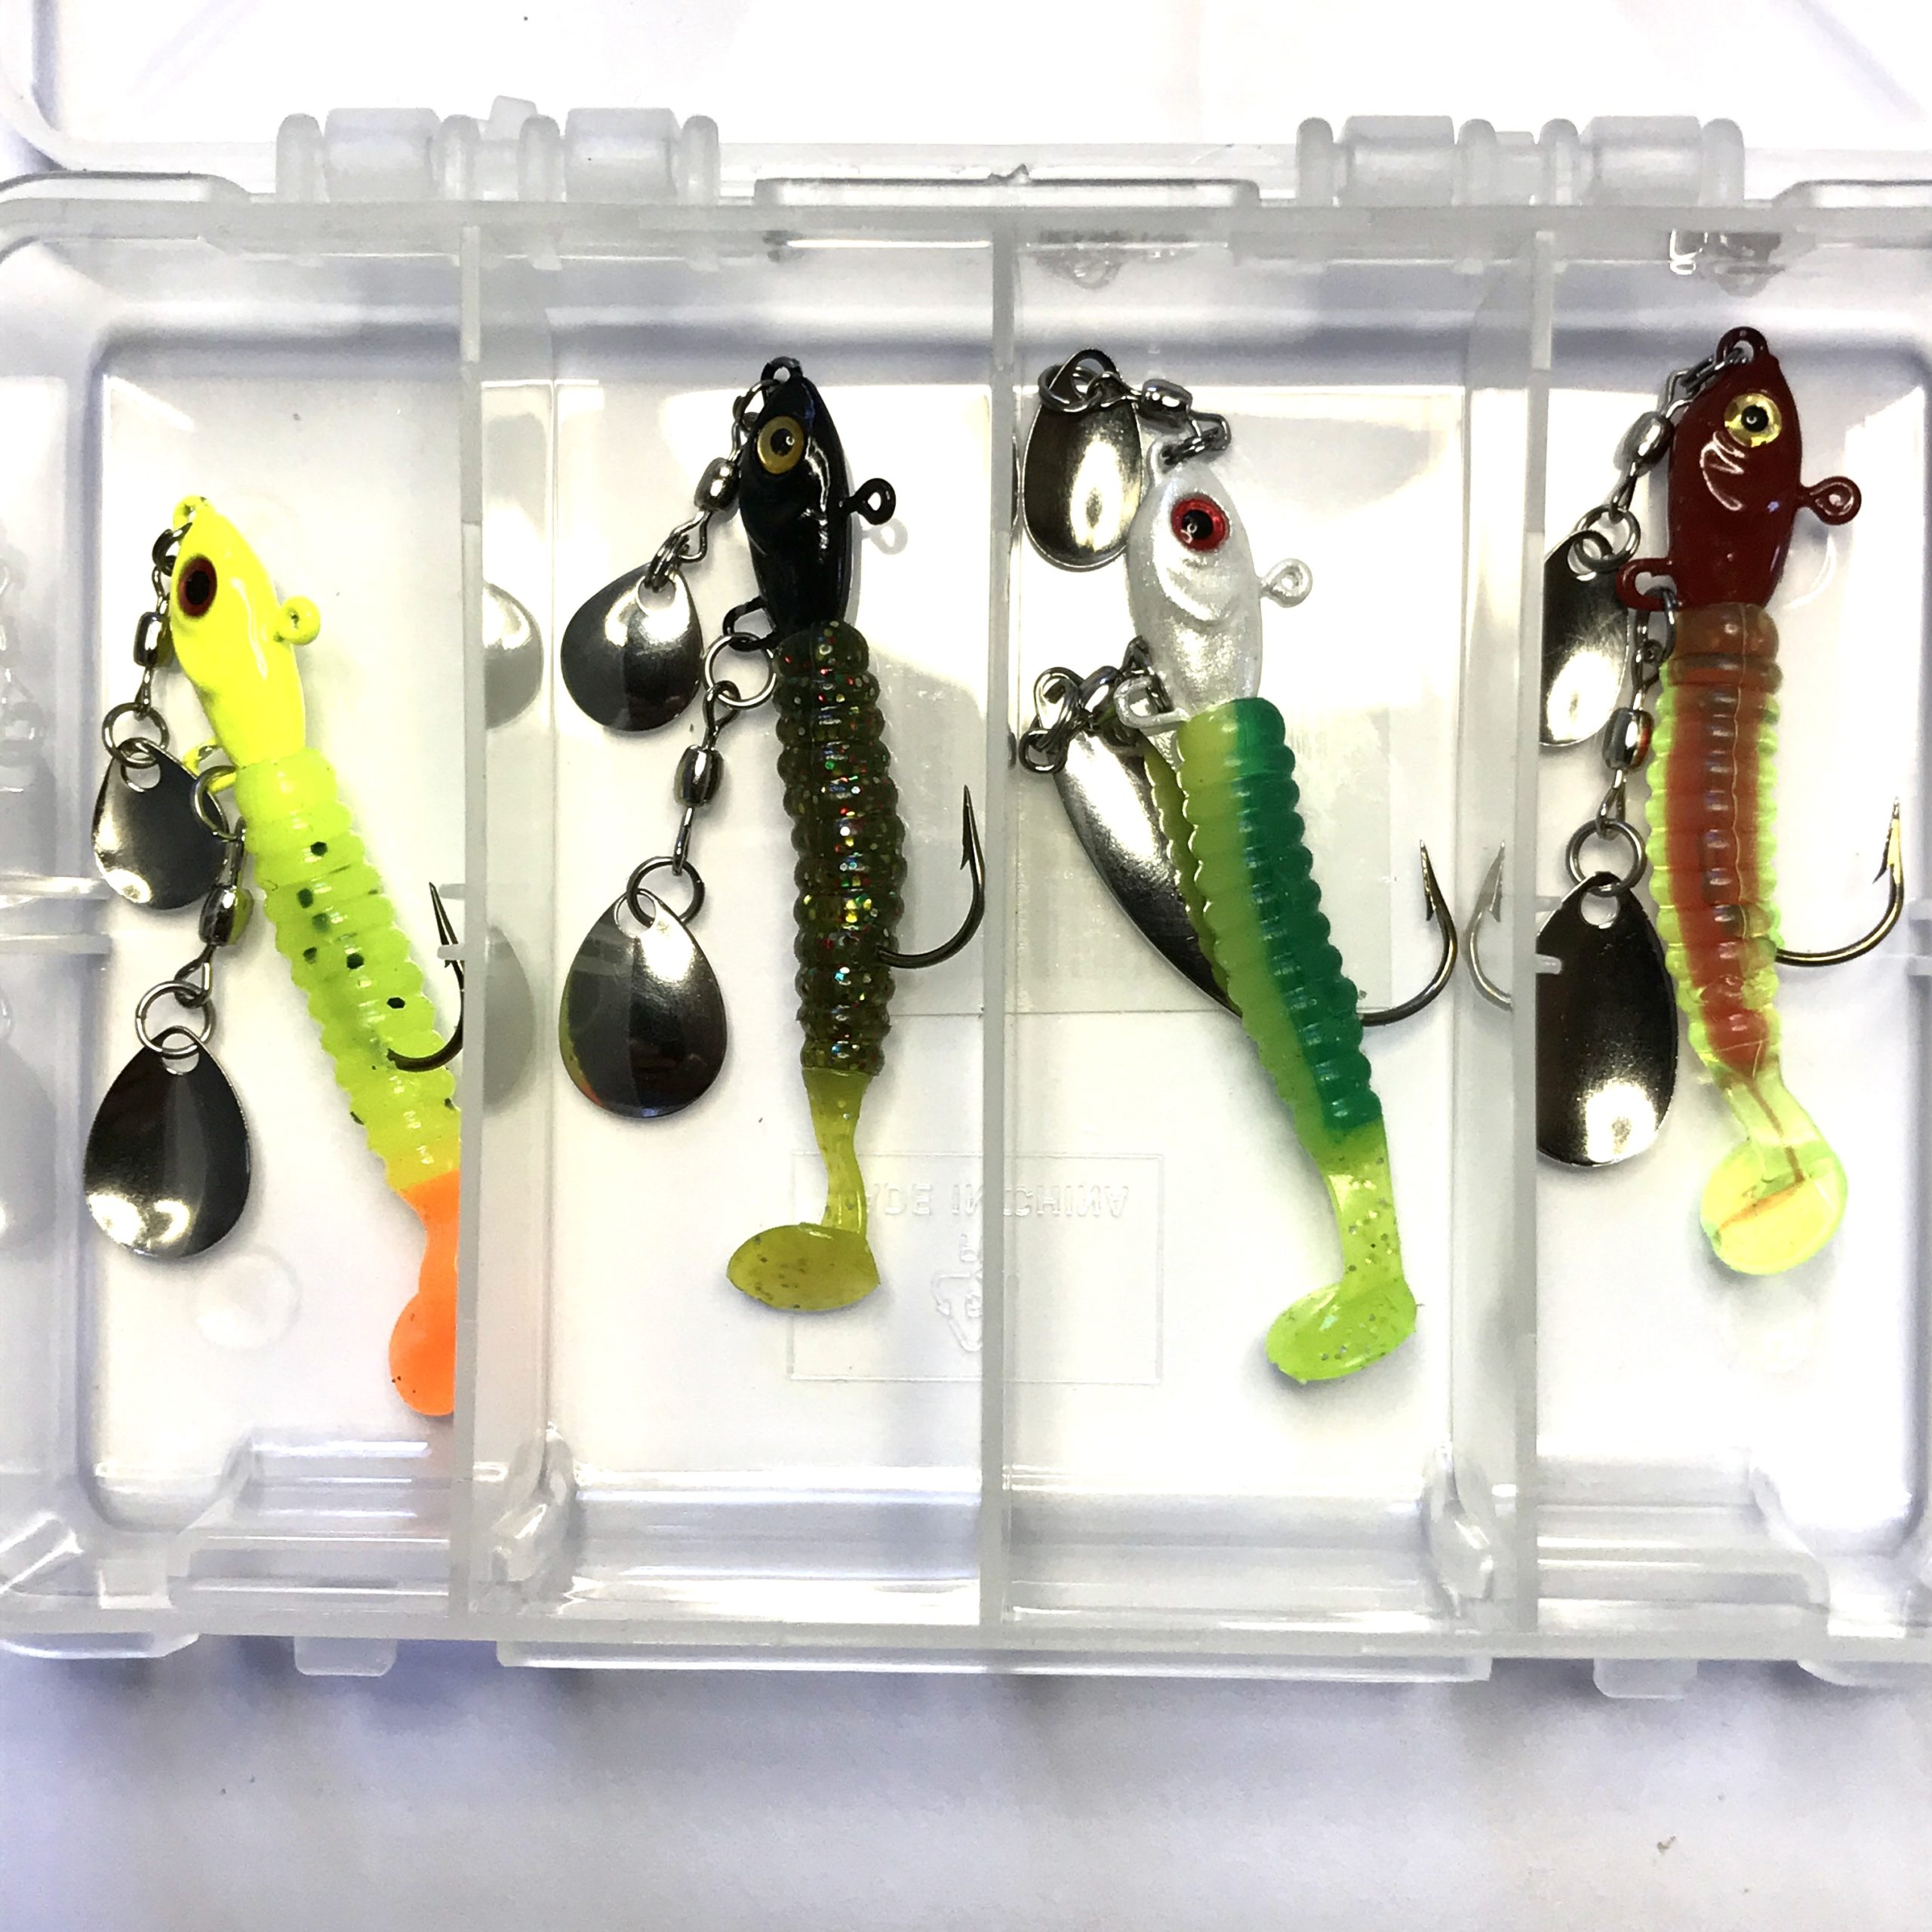 600+ Pc Crappie Lure Lot Kit Damaged Packs See Pics FREE SHIPPING!